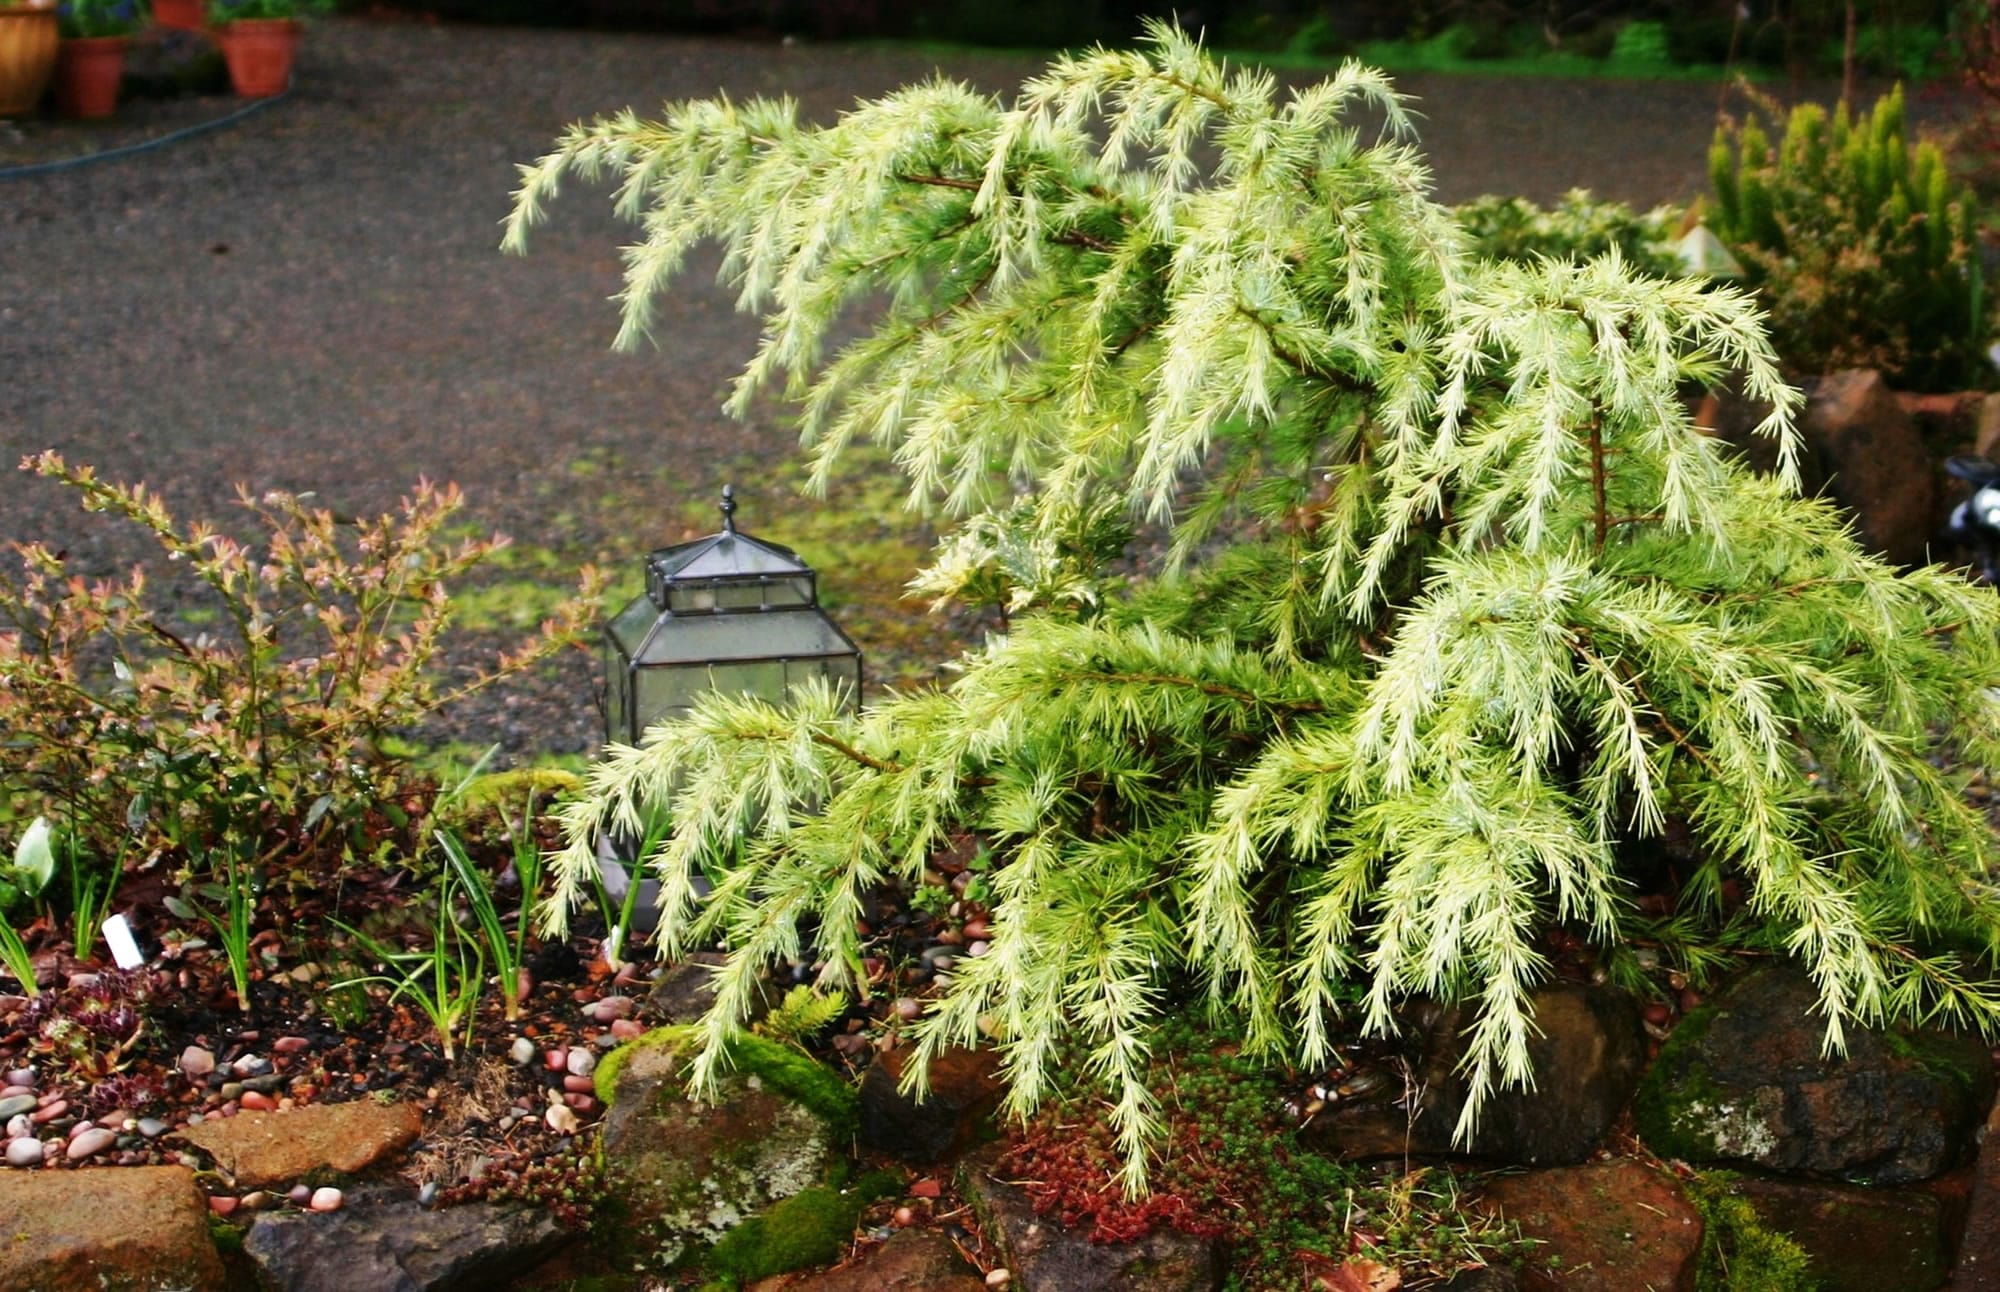 Every year, new colors are added to the once all-green family of conifers.